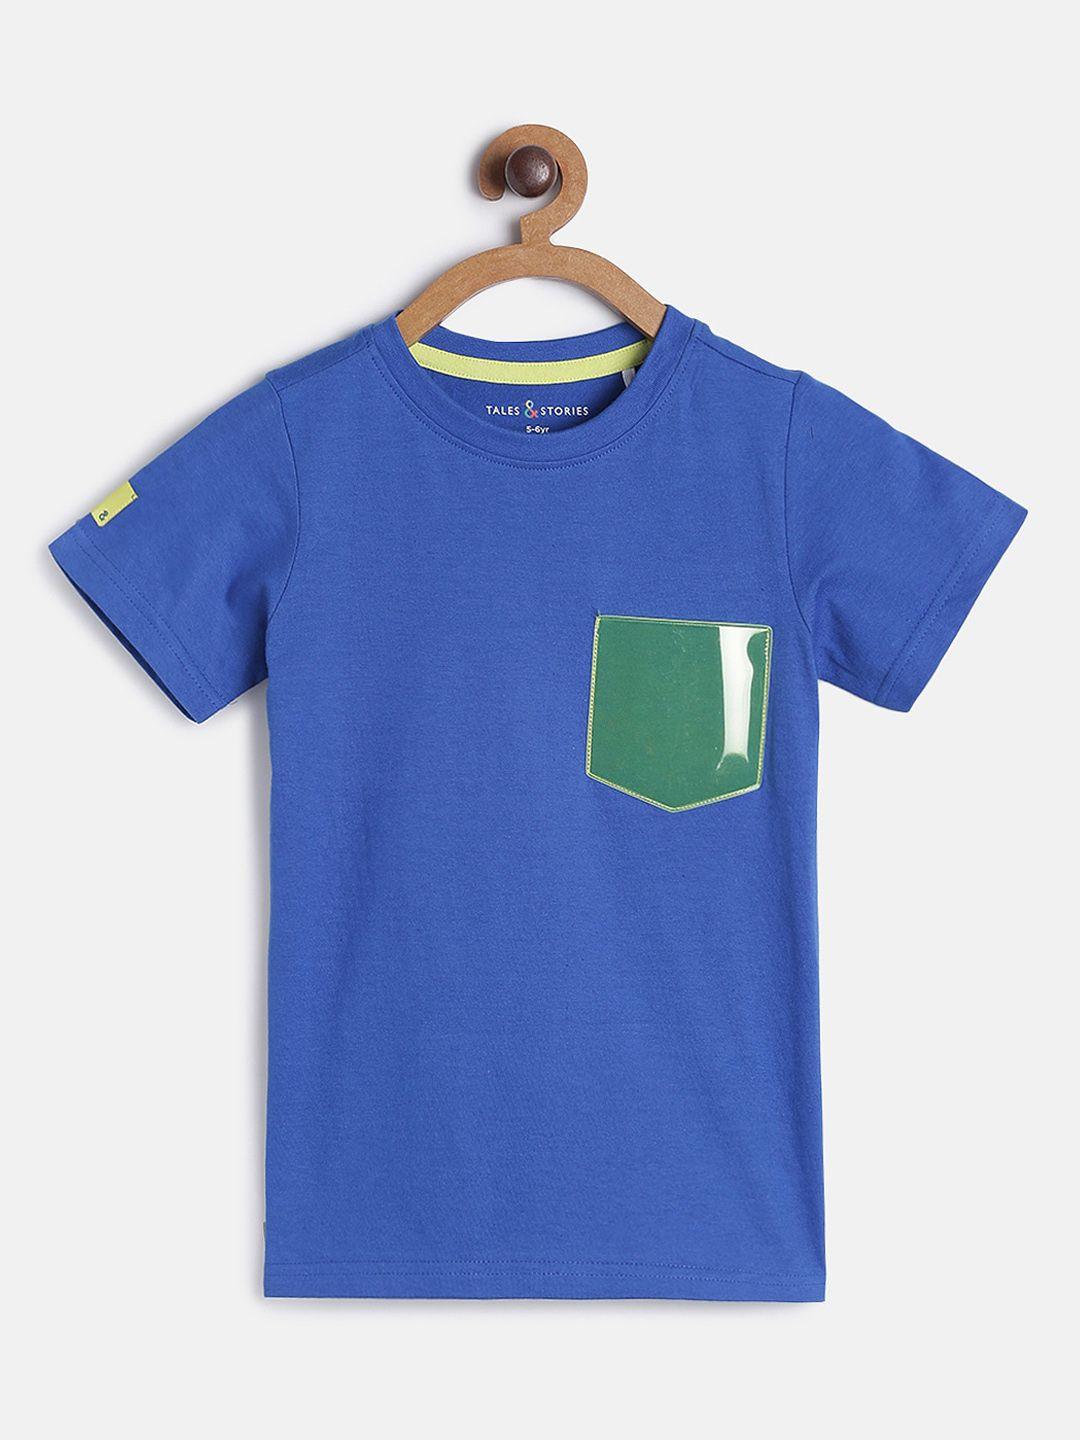 tales & stories royal boys blue printed round neck t-shirt